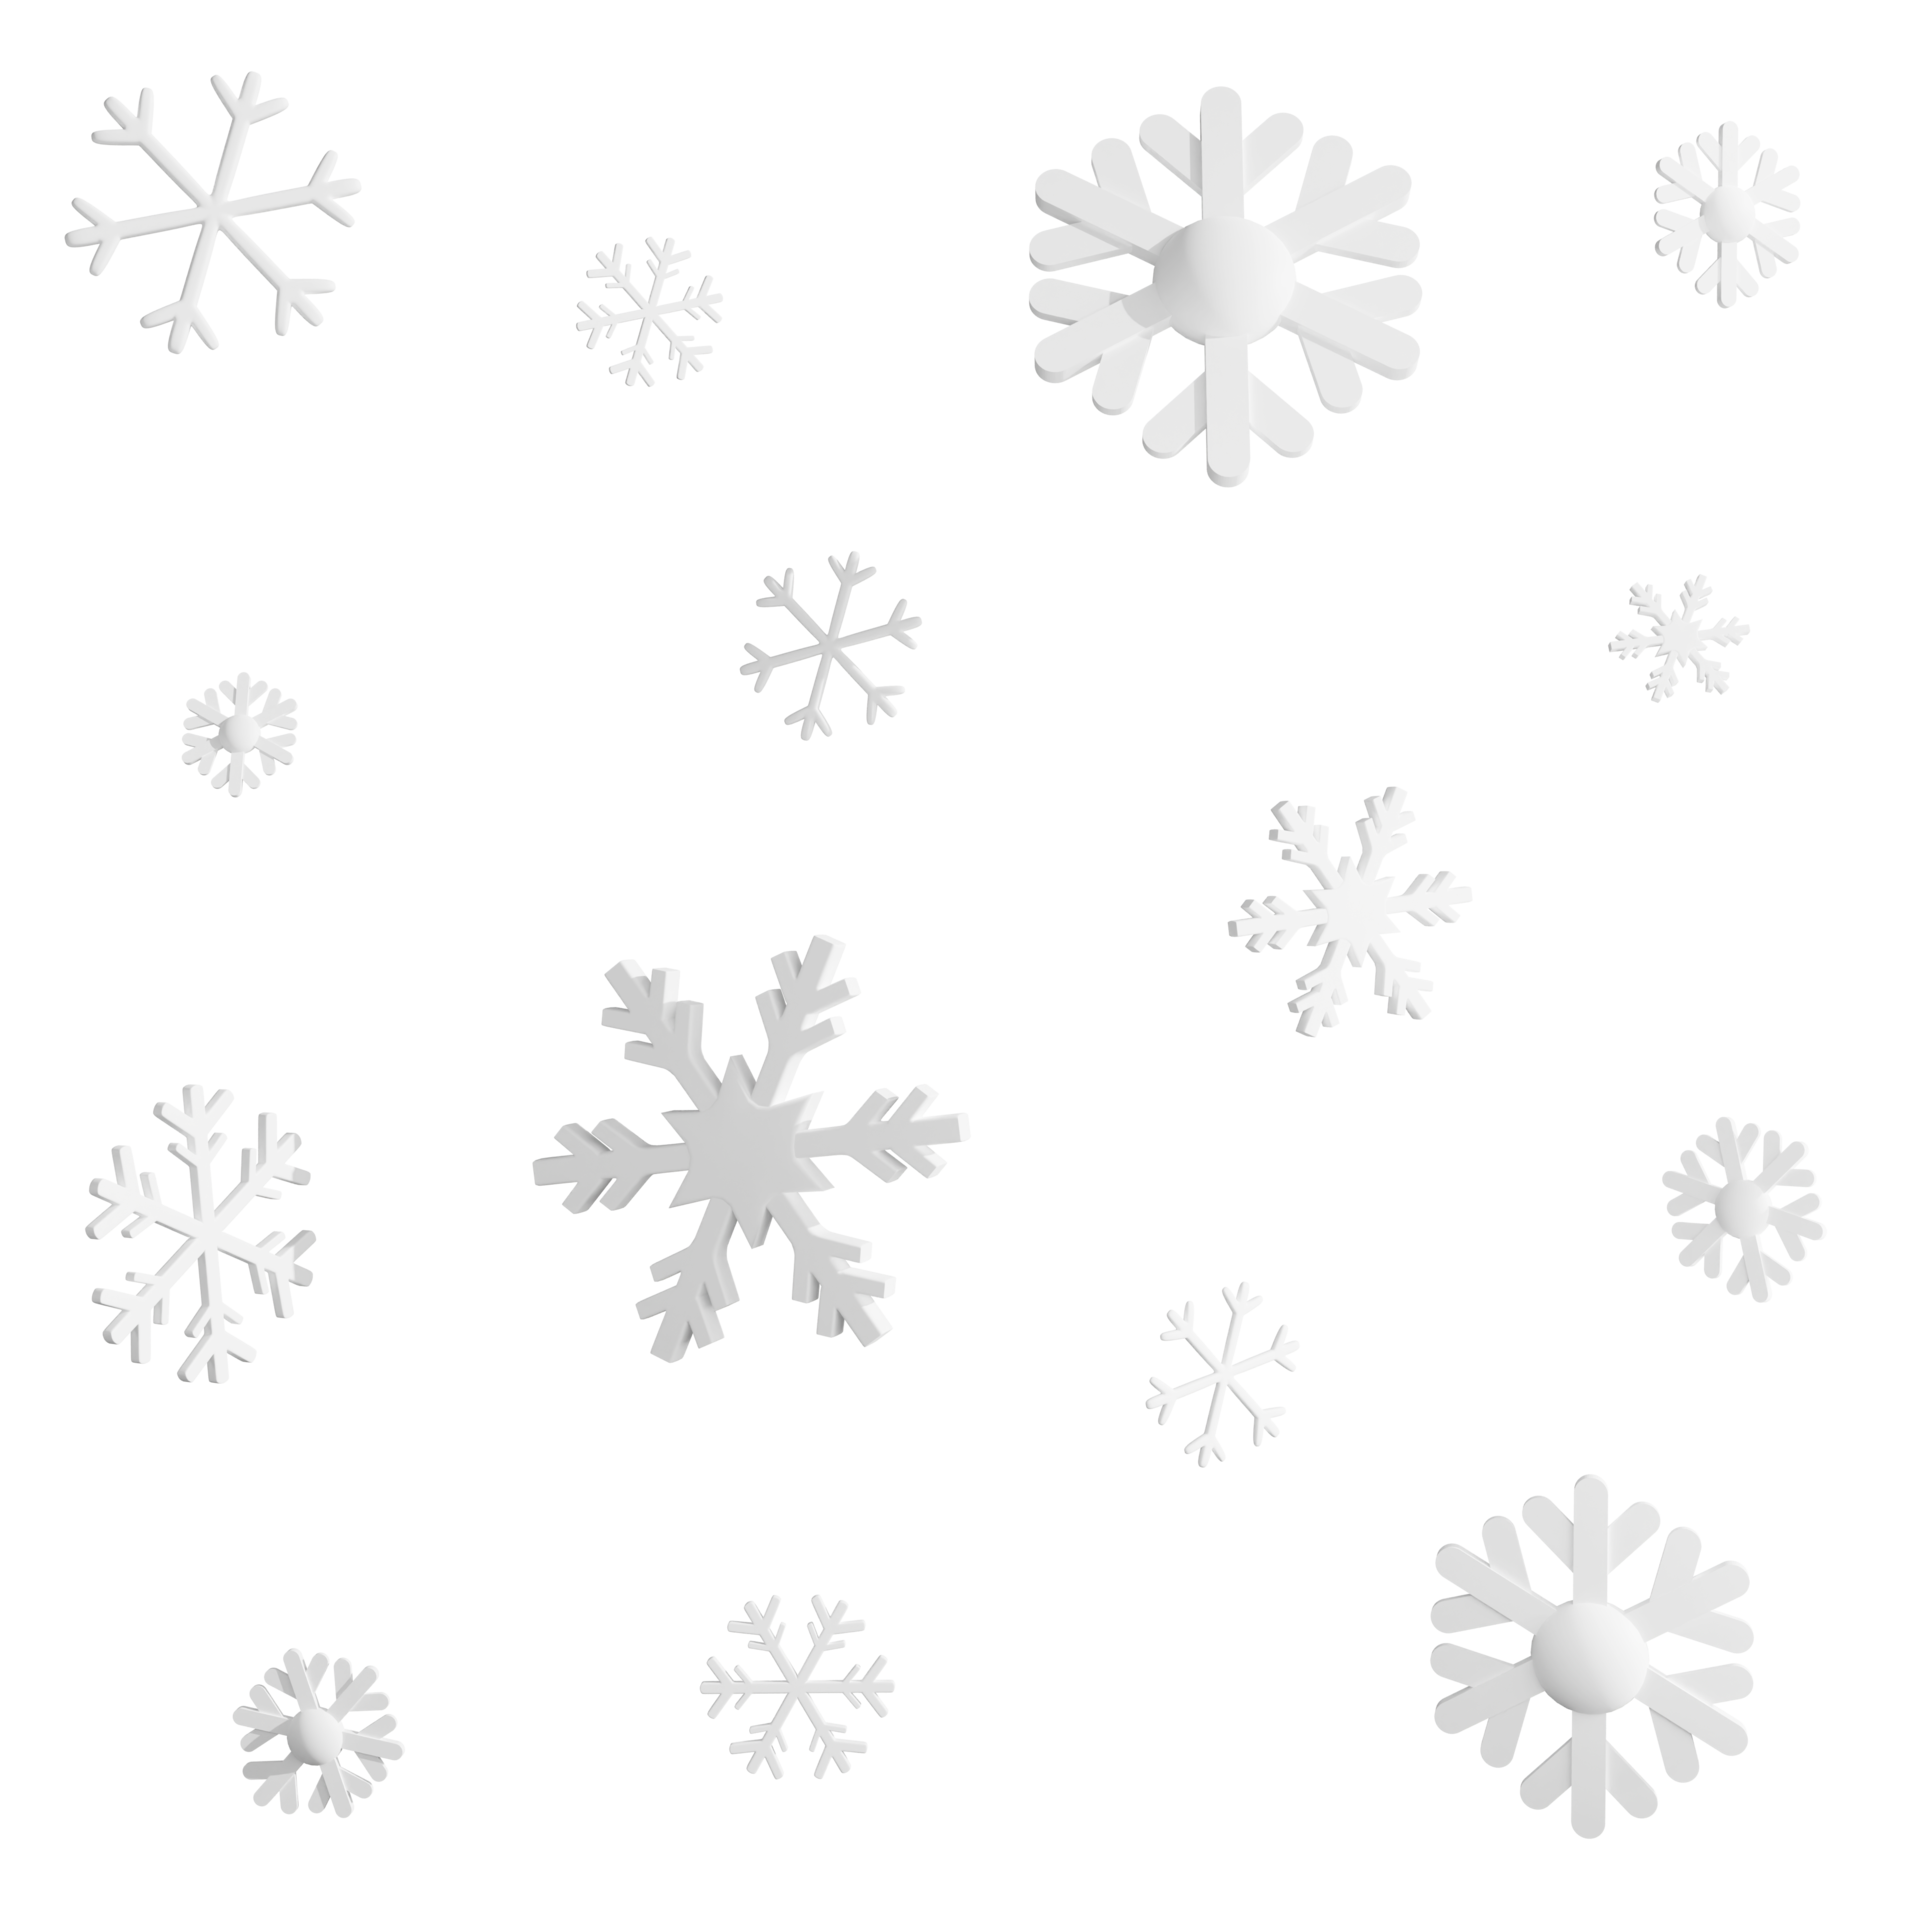 White snowflakes falling clipart flat design icon isolated on